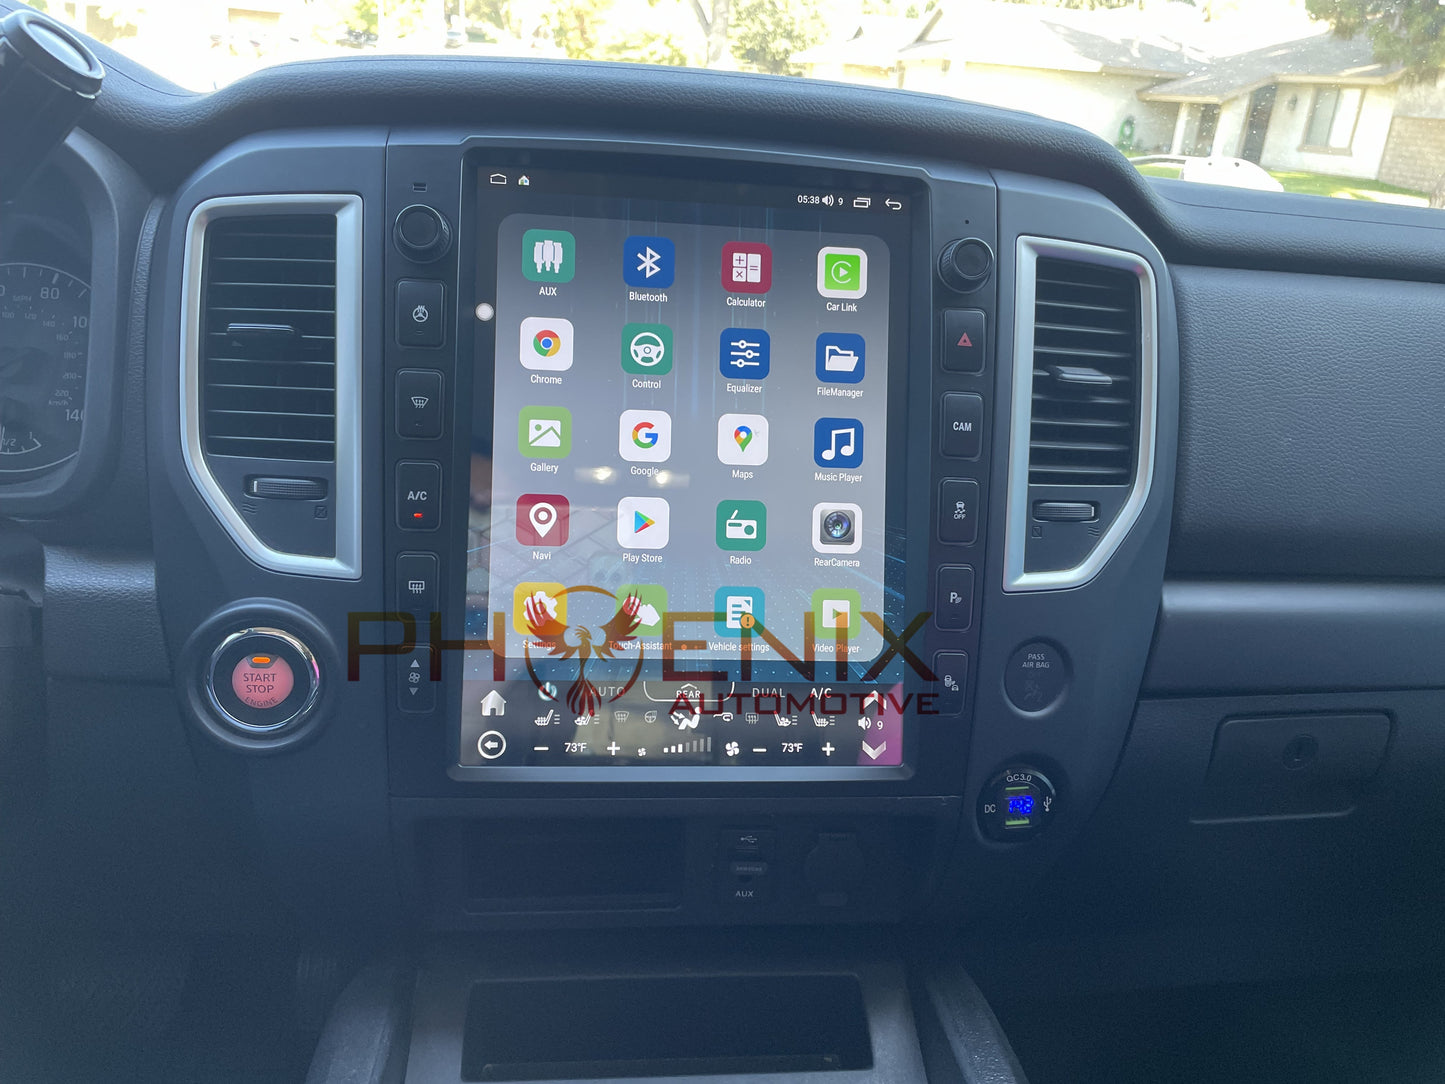 13” Android 9 / 10 Vertical Screen Navigation Radio for Nissan Titan (XD) 2016 - 2019